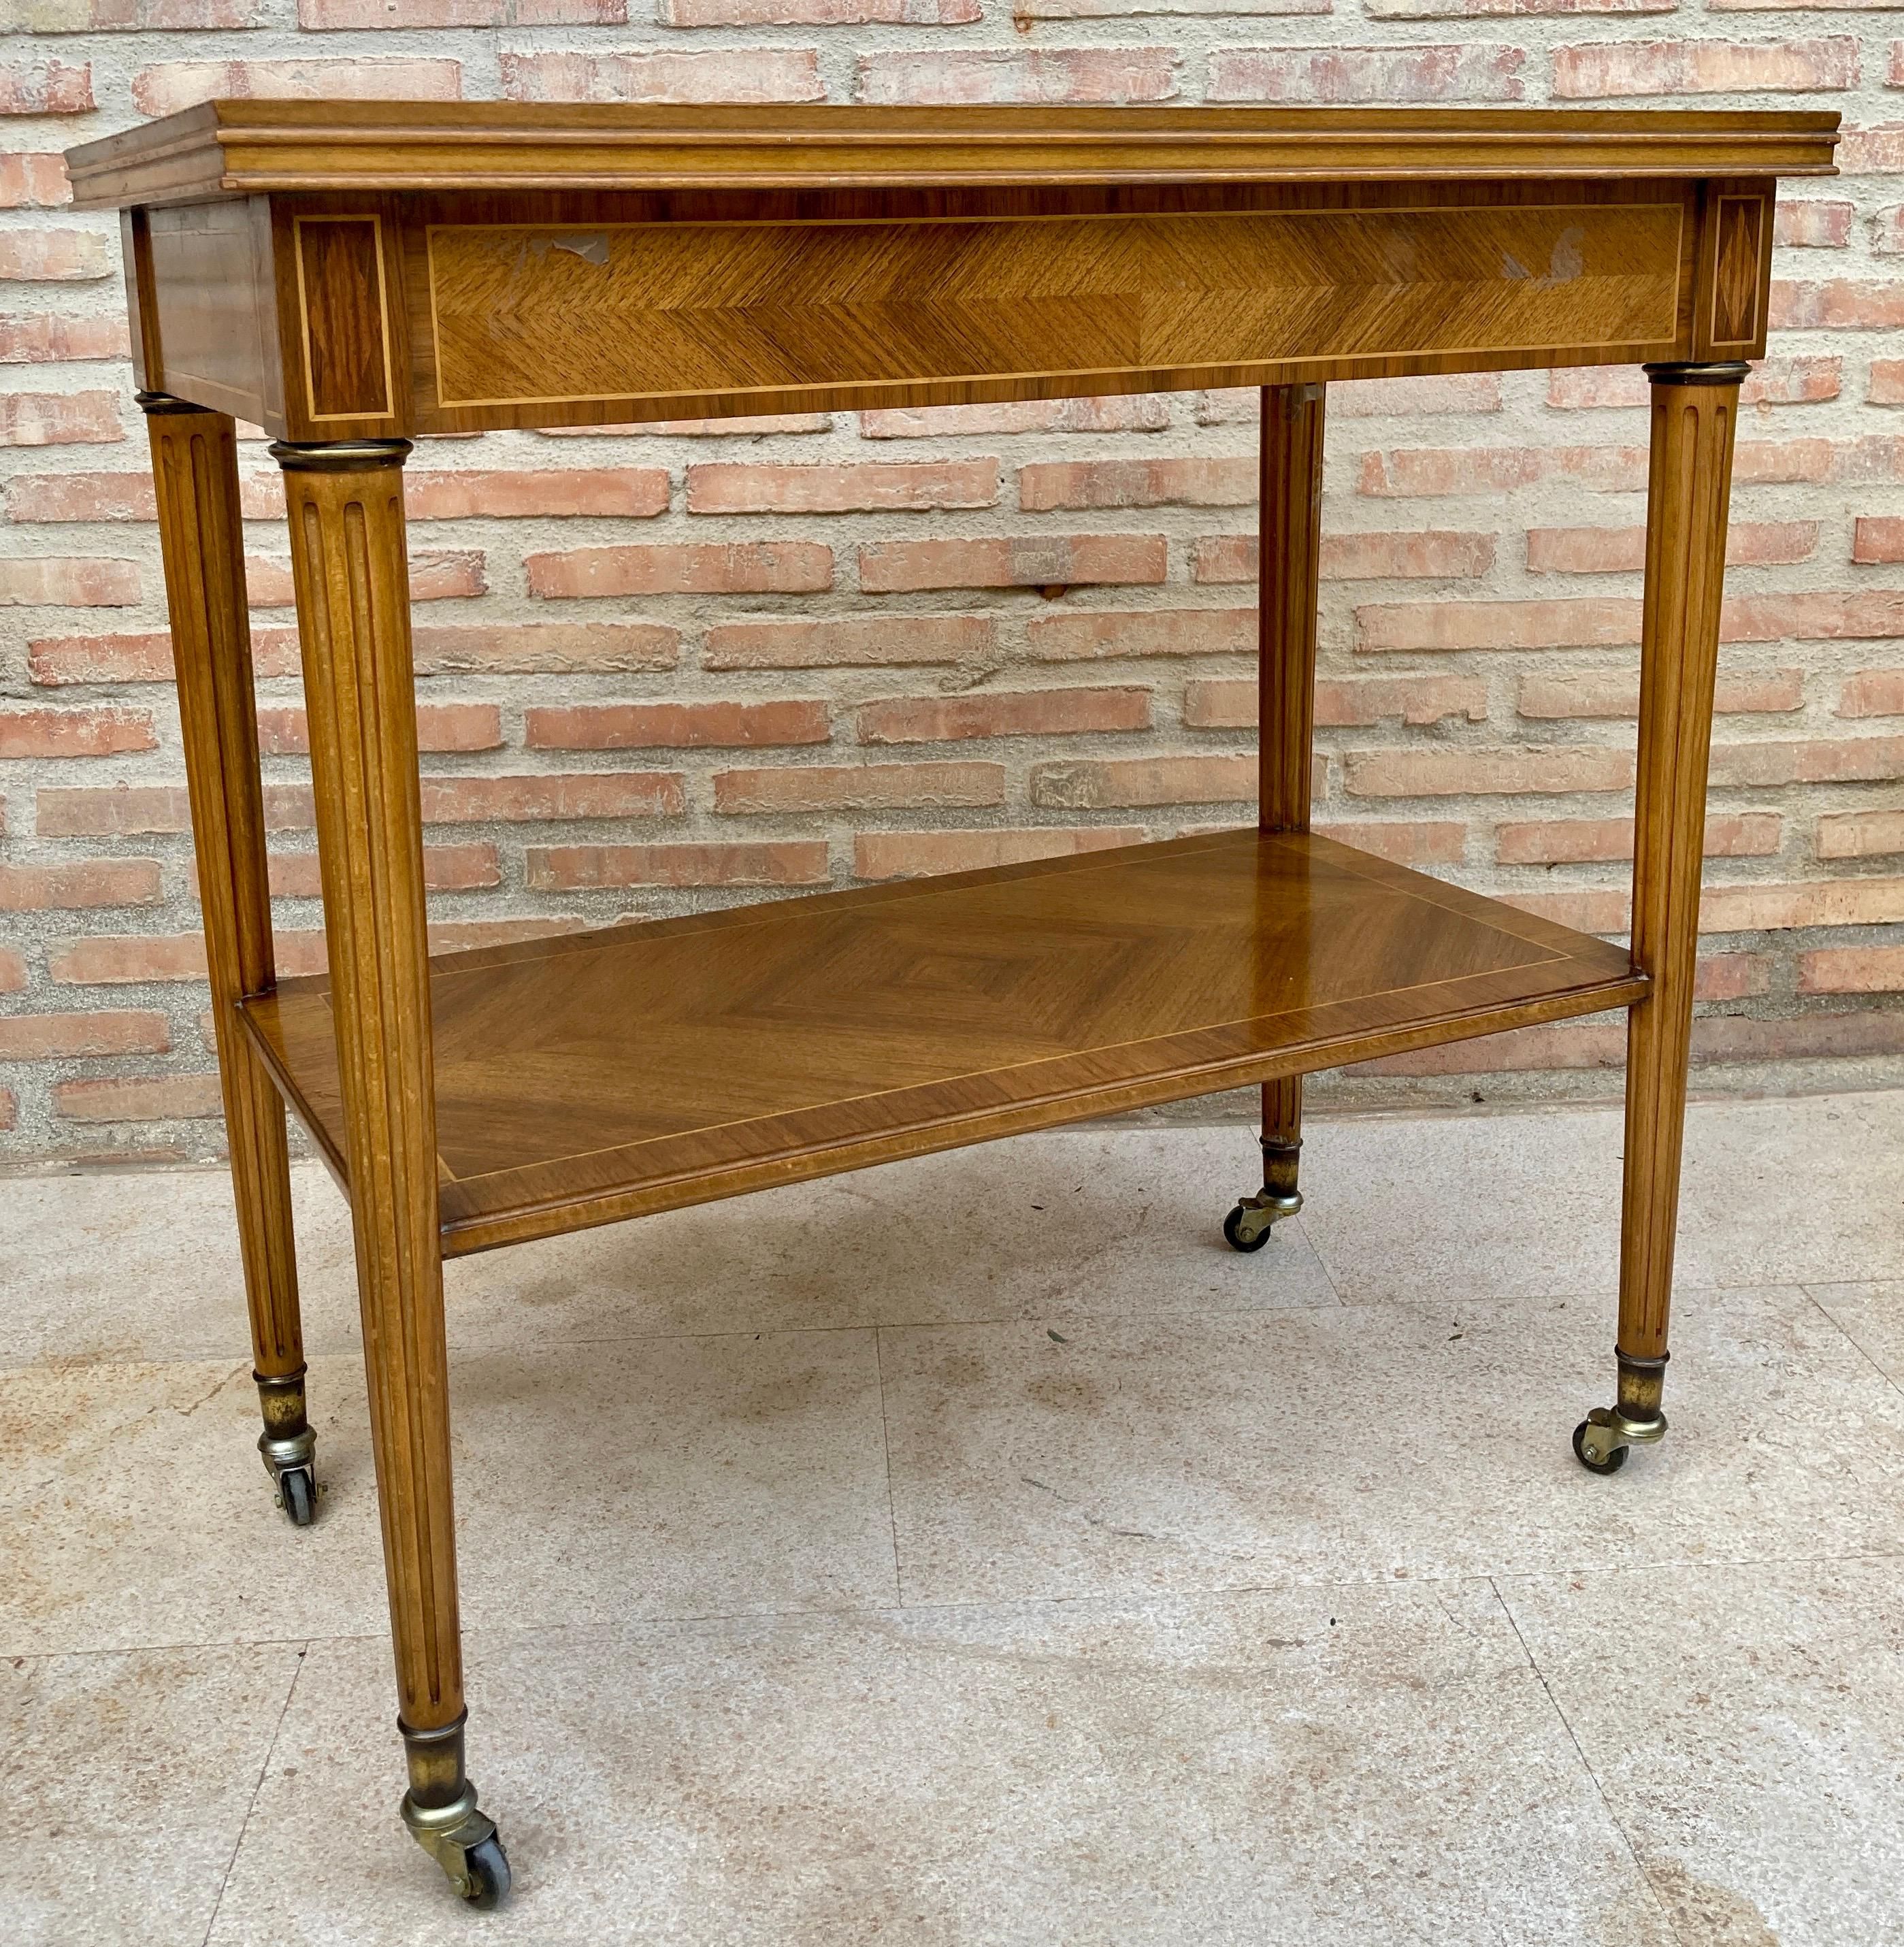 Neoclassic French Marquetry Side Table With One Drawer And Wheels 1940s For Sale 1